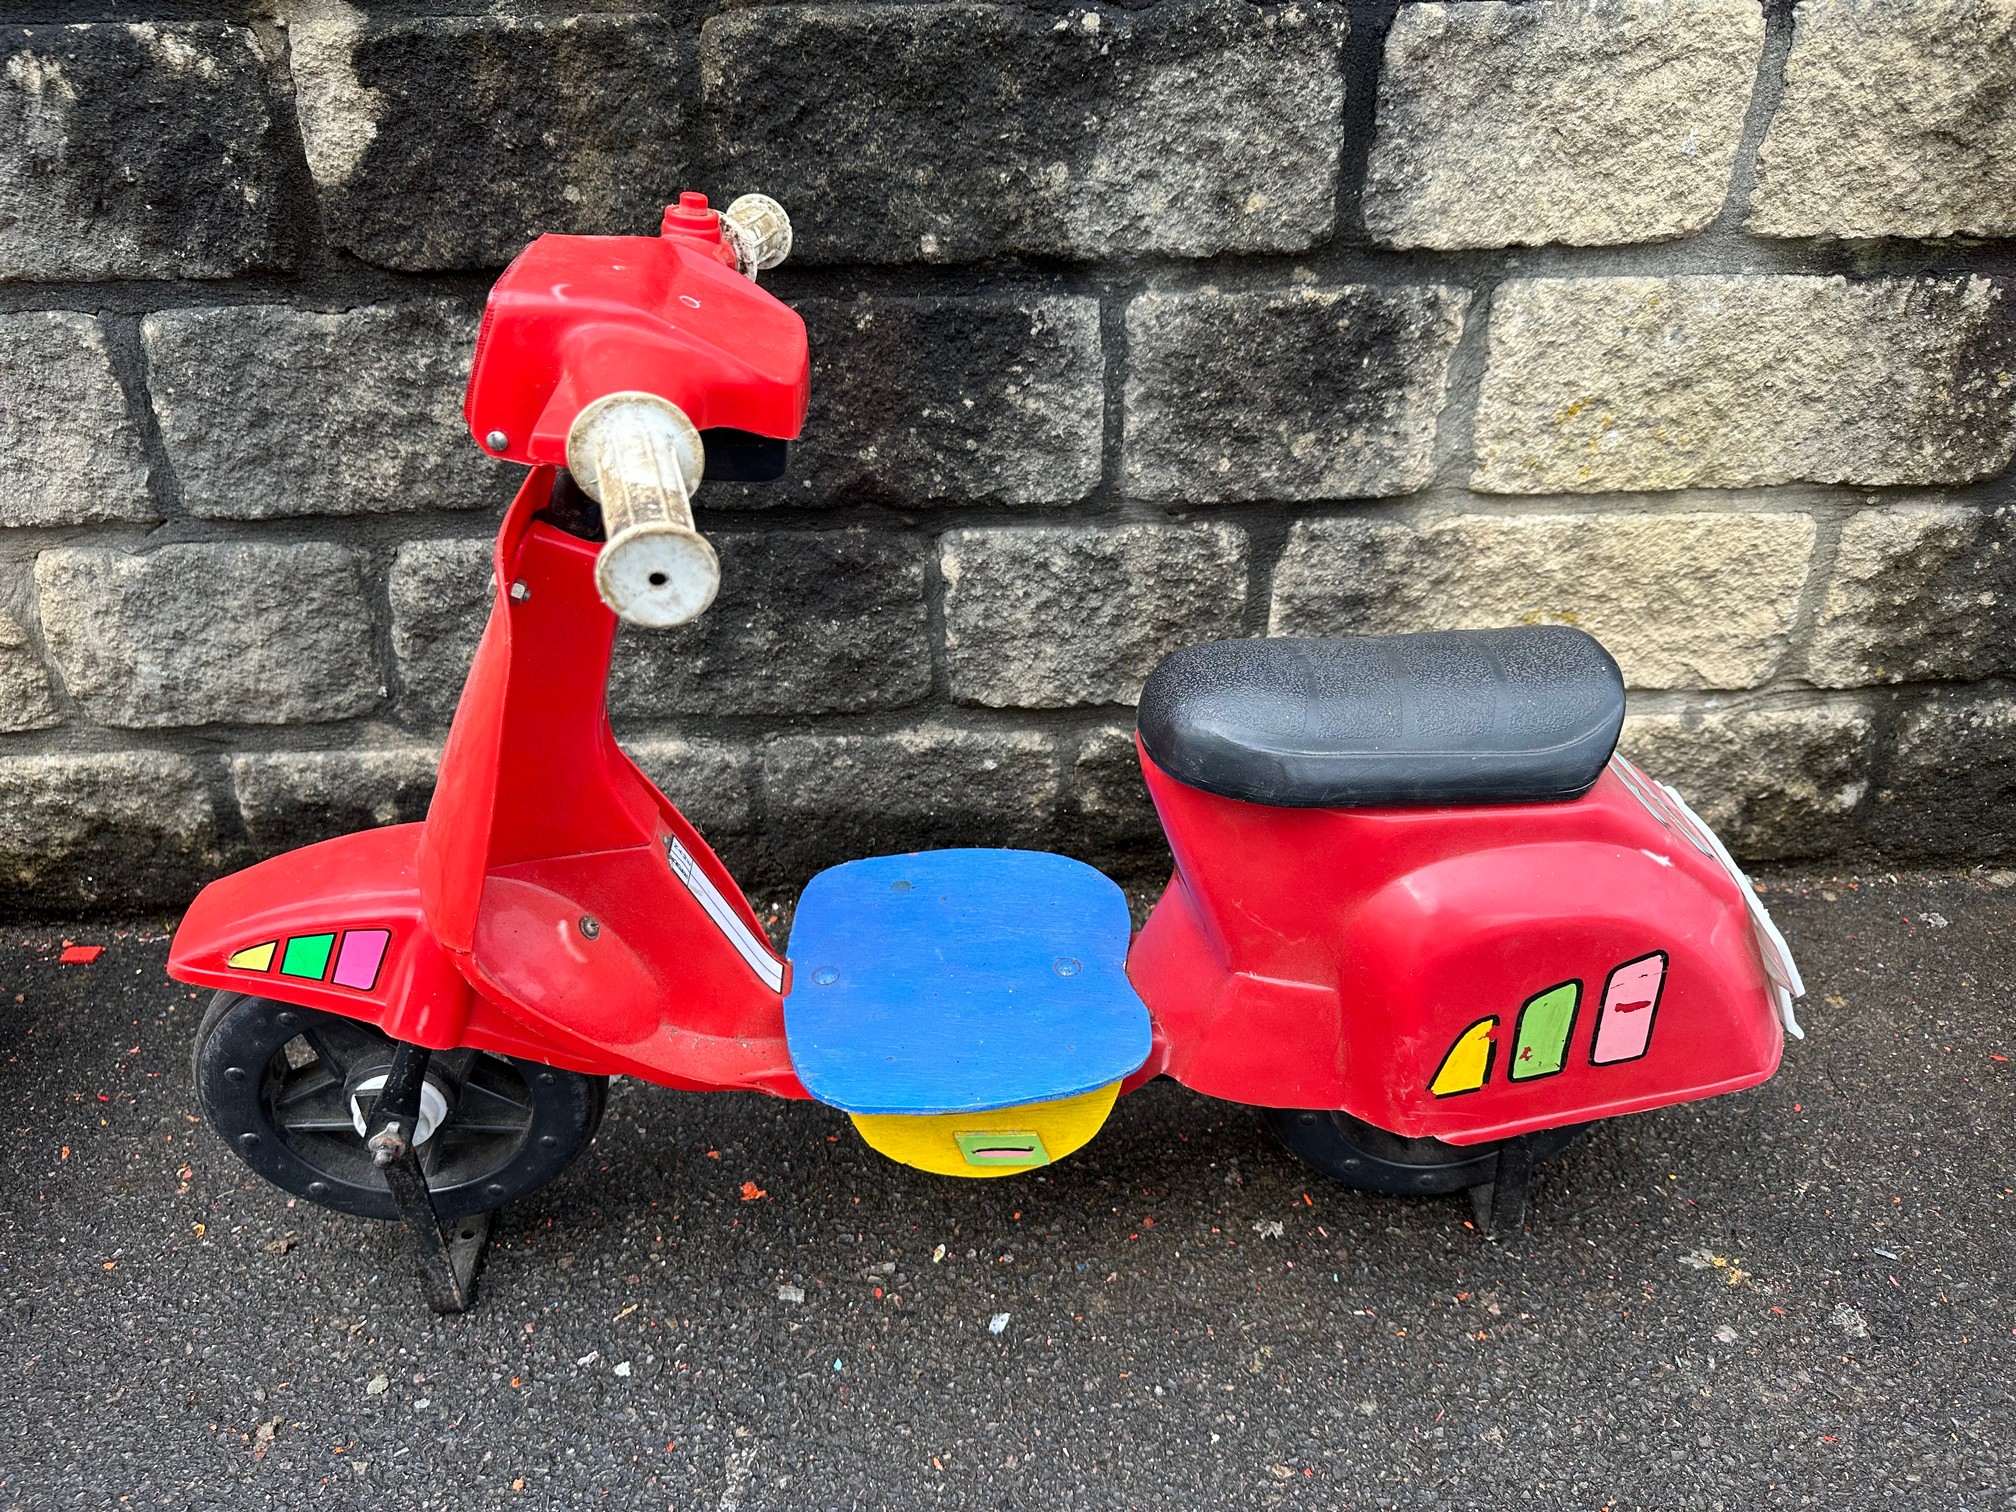 A fairground ride in the form of scooter.